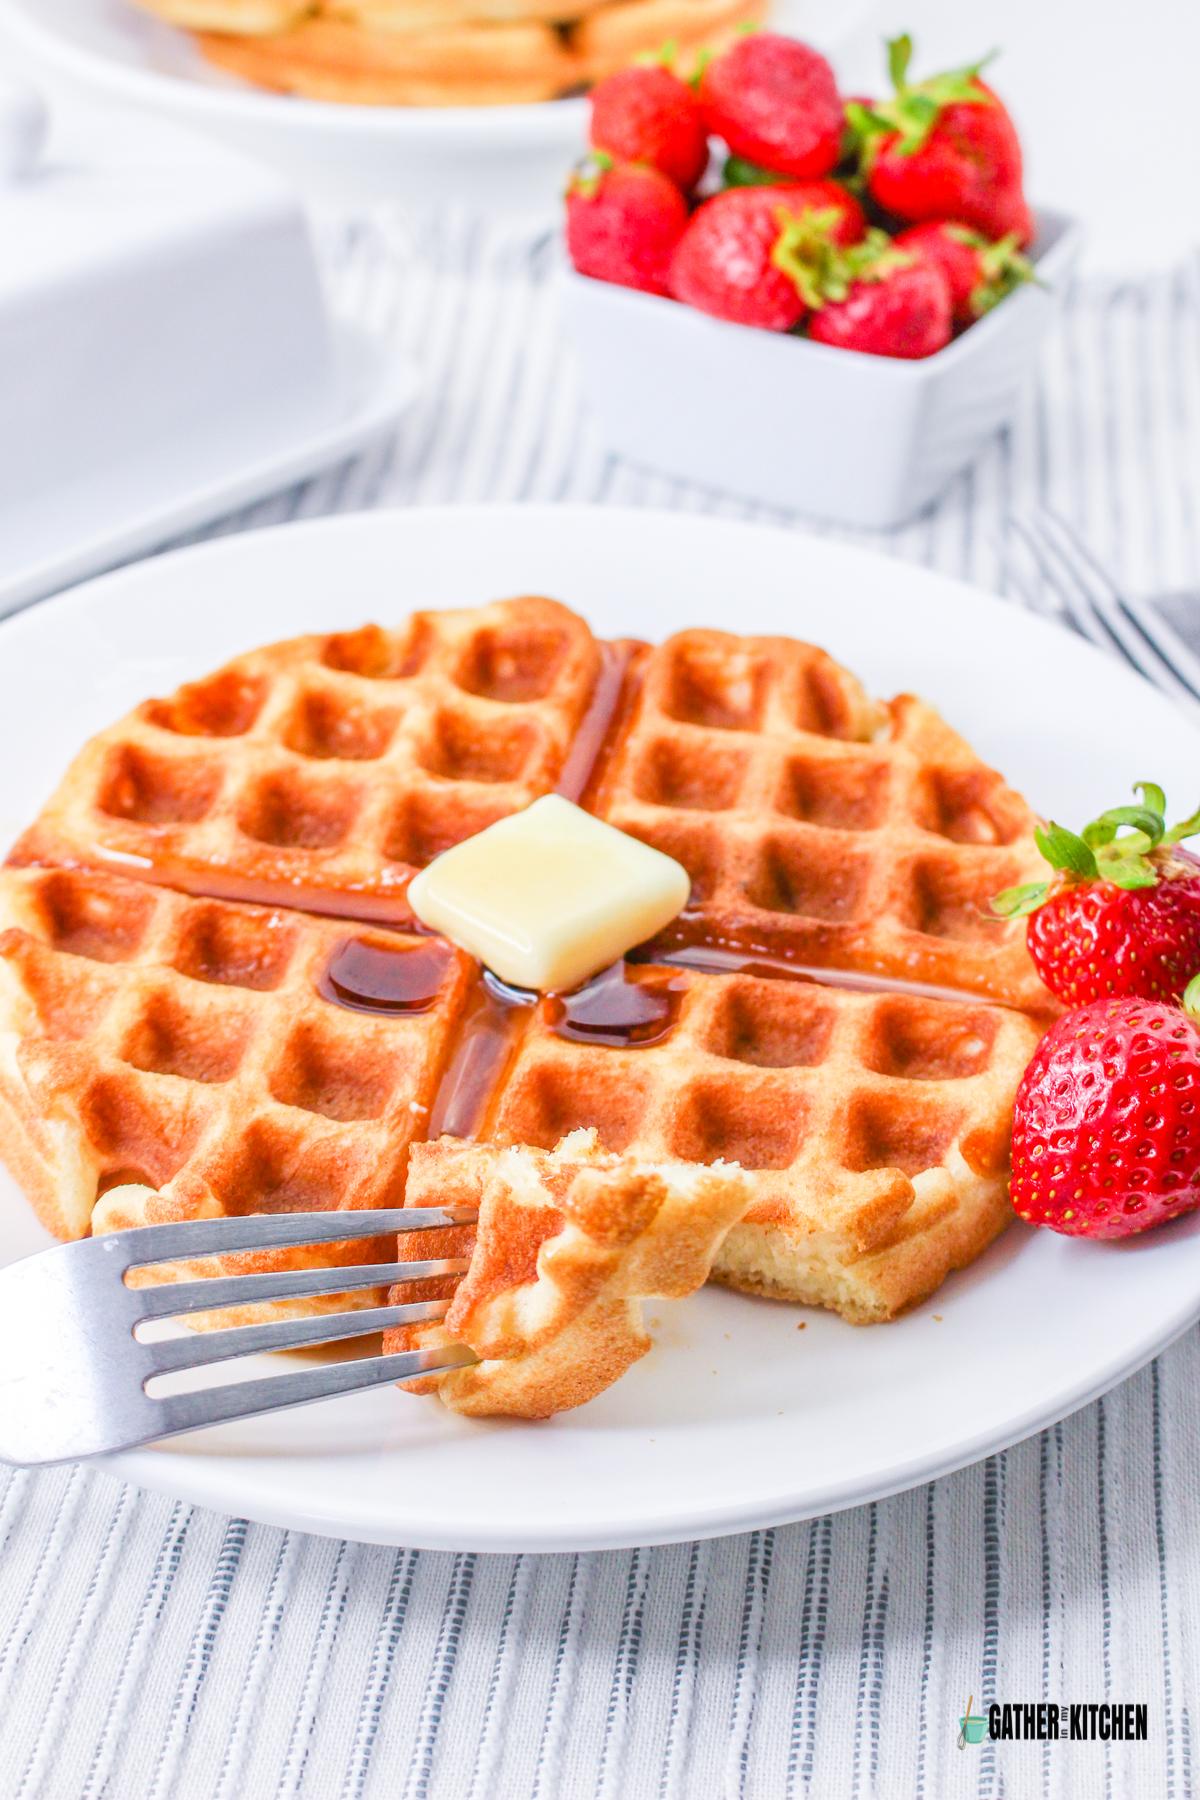 A plate of Pancake Mix Waffle and a fork with a portion of the waffle.